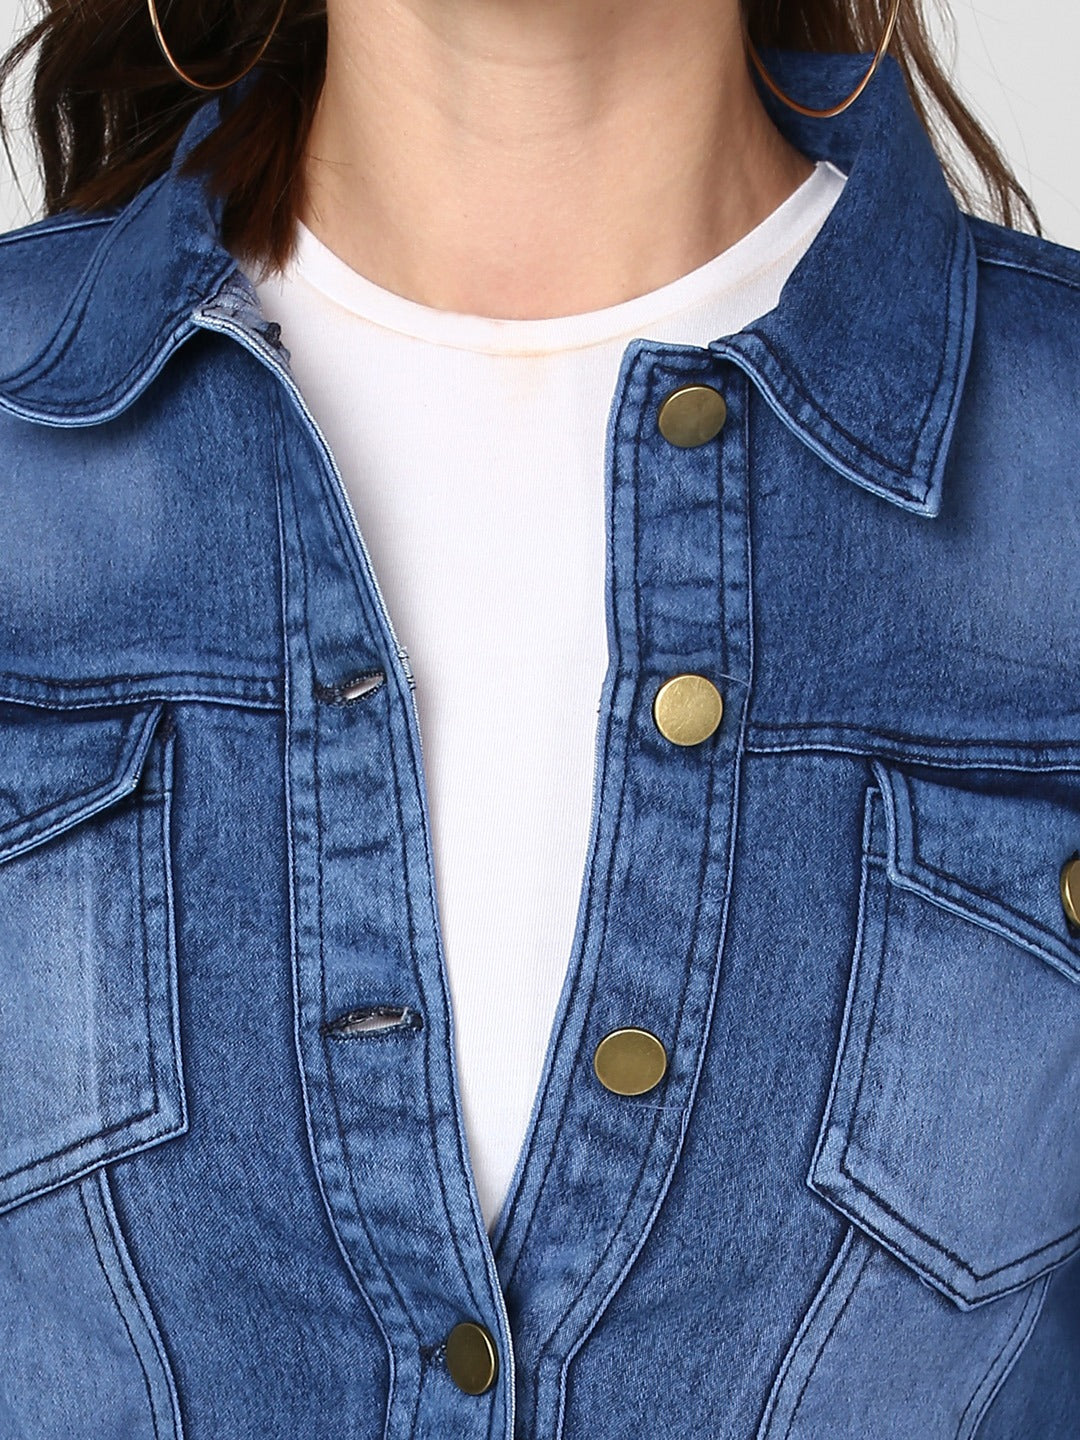 Women's classic denim jacket with button-up design and casual, versatile style.